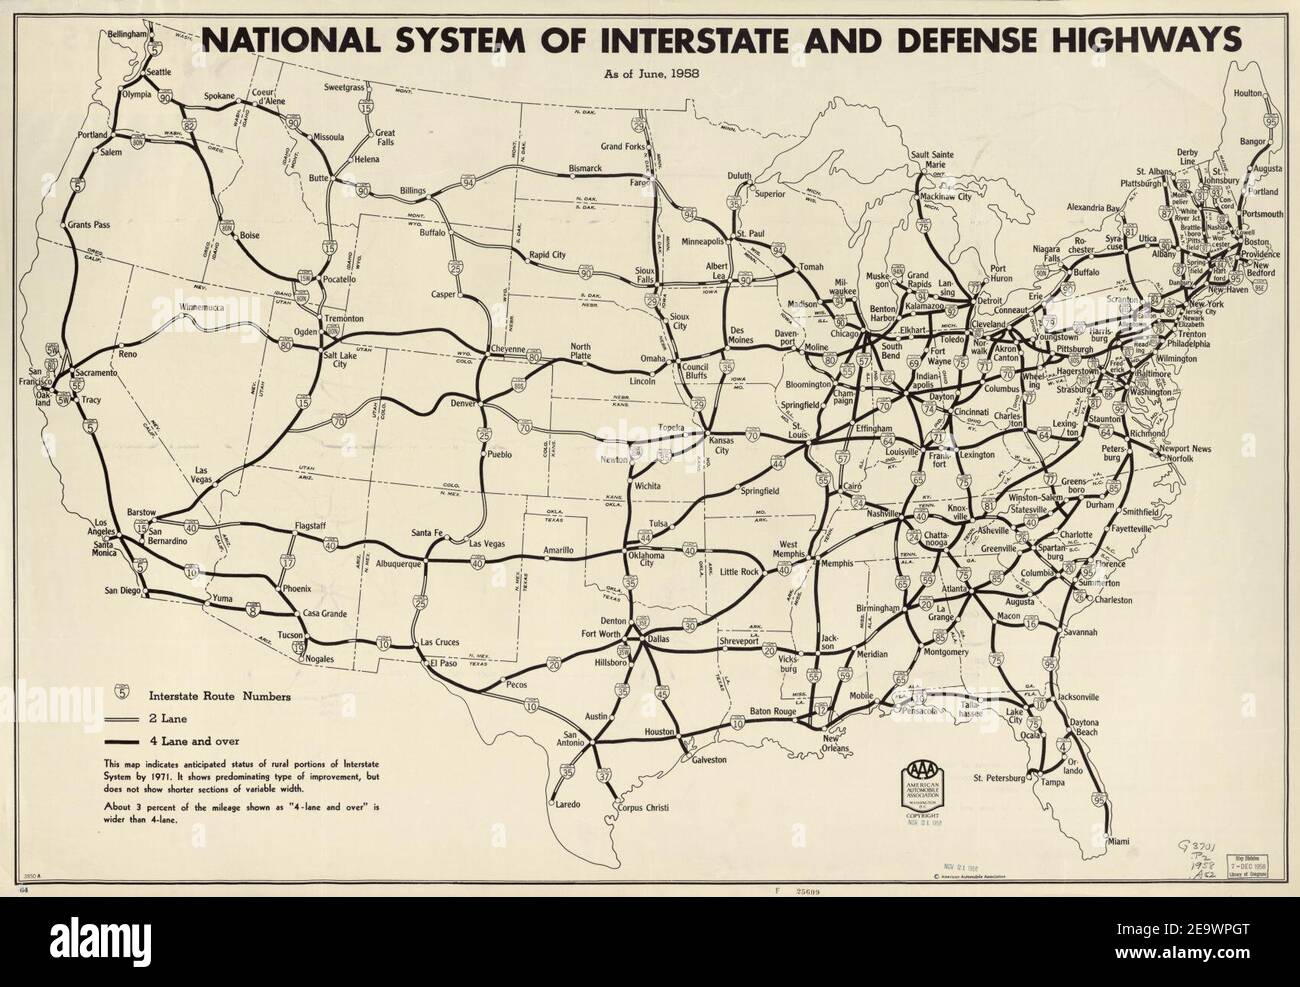 National system of interstate and defense highways - as of June, 1958 Stock Photo